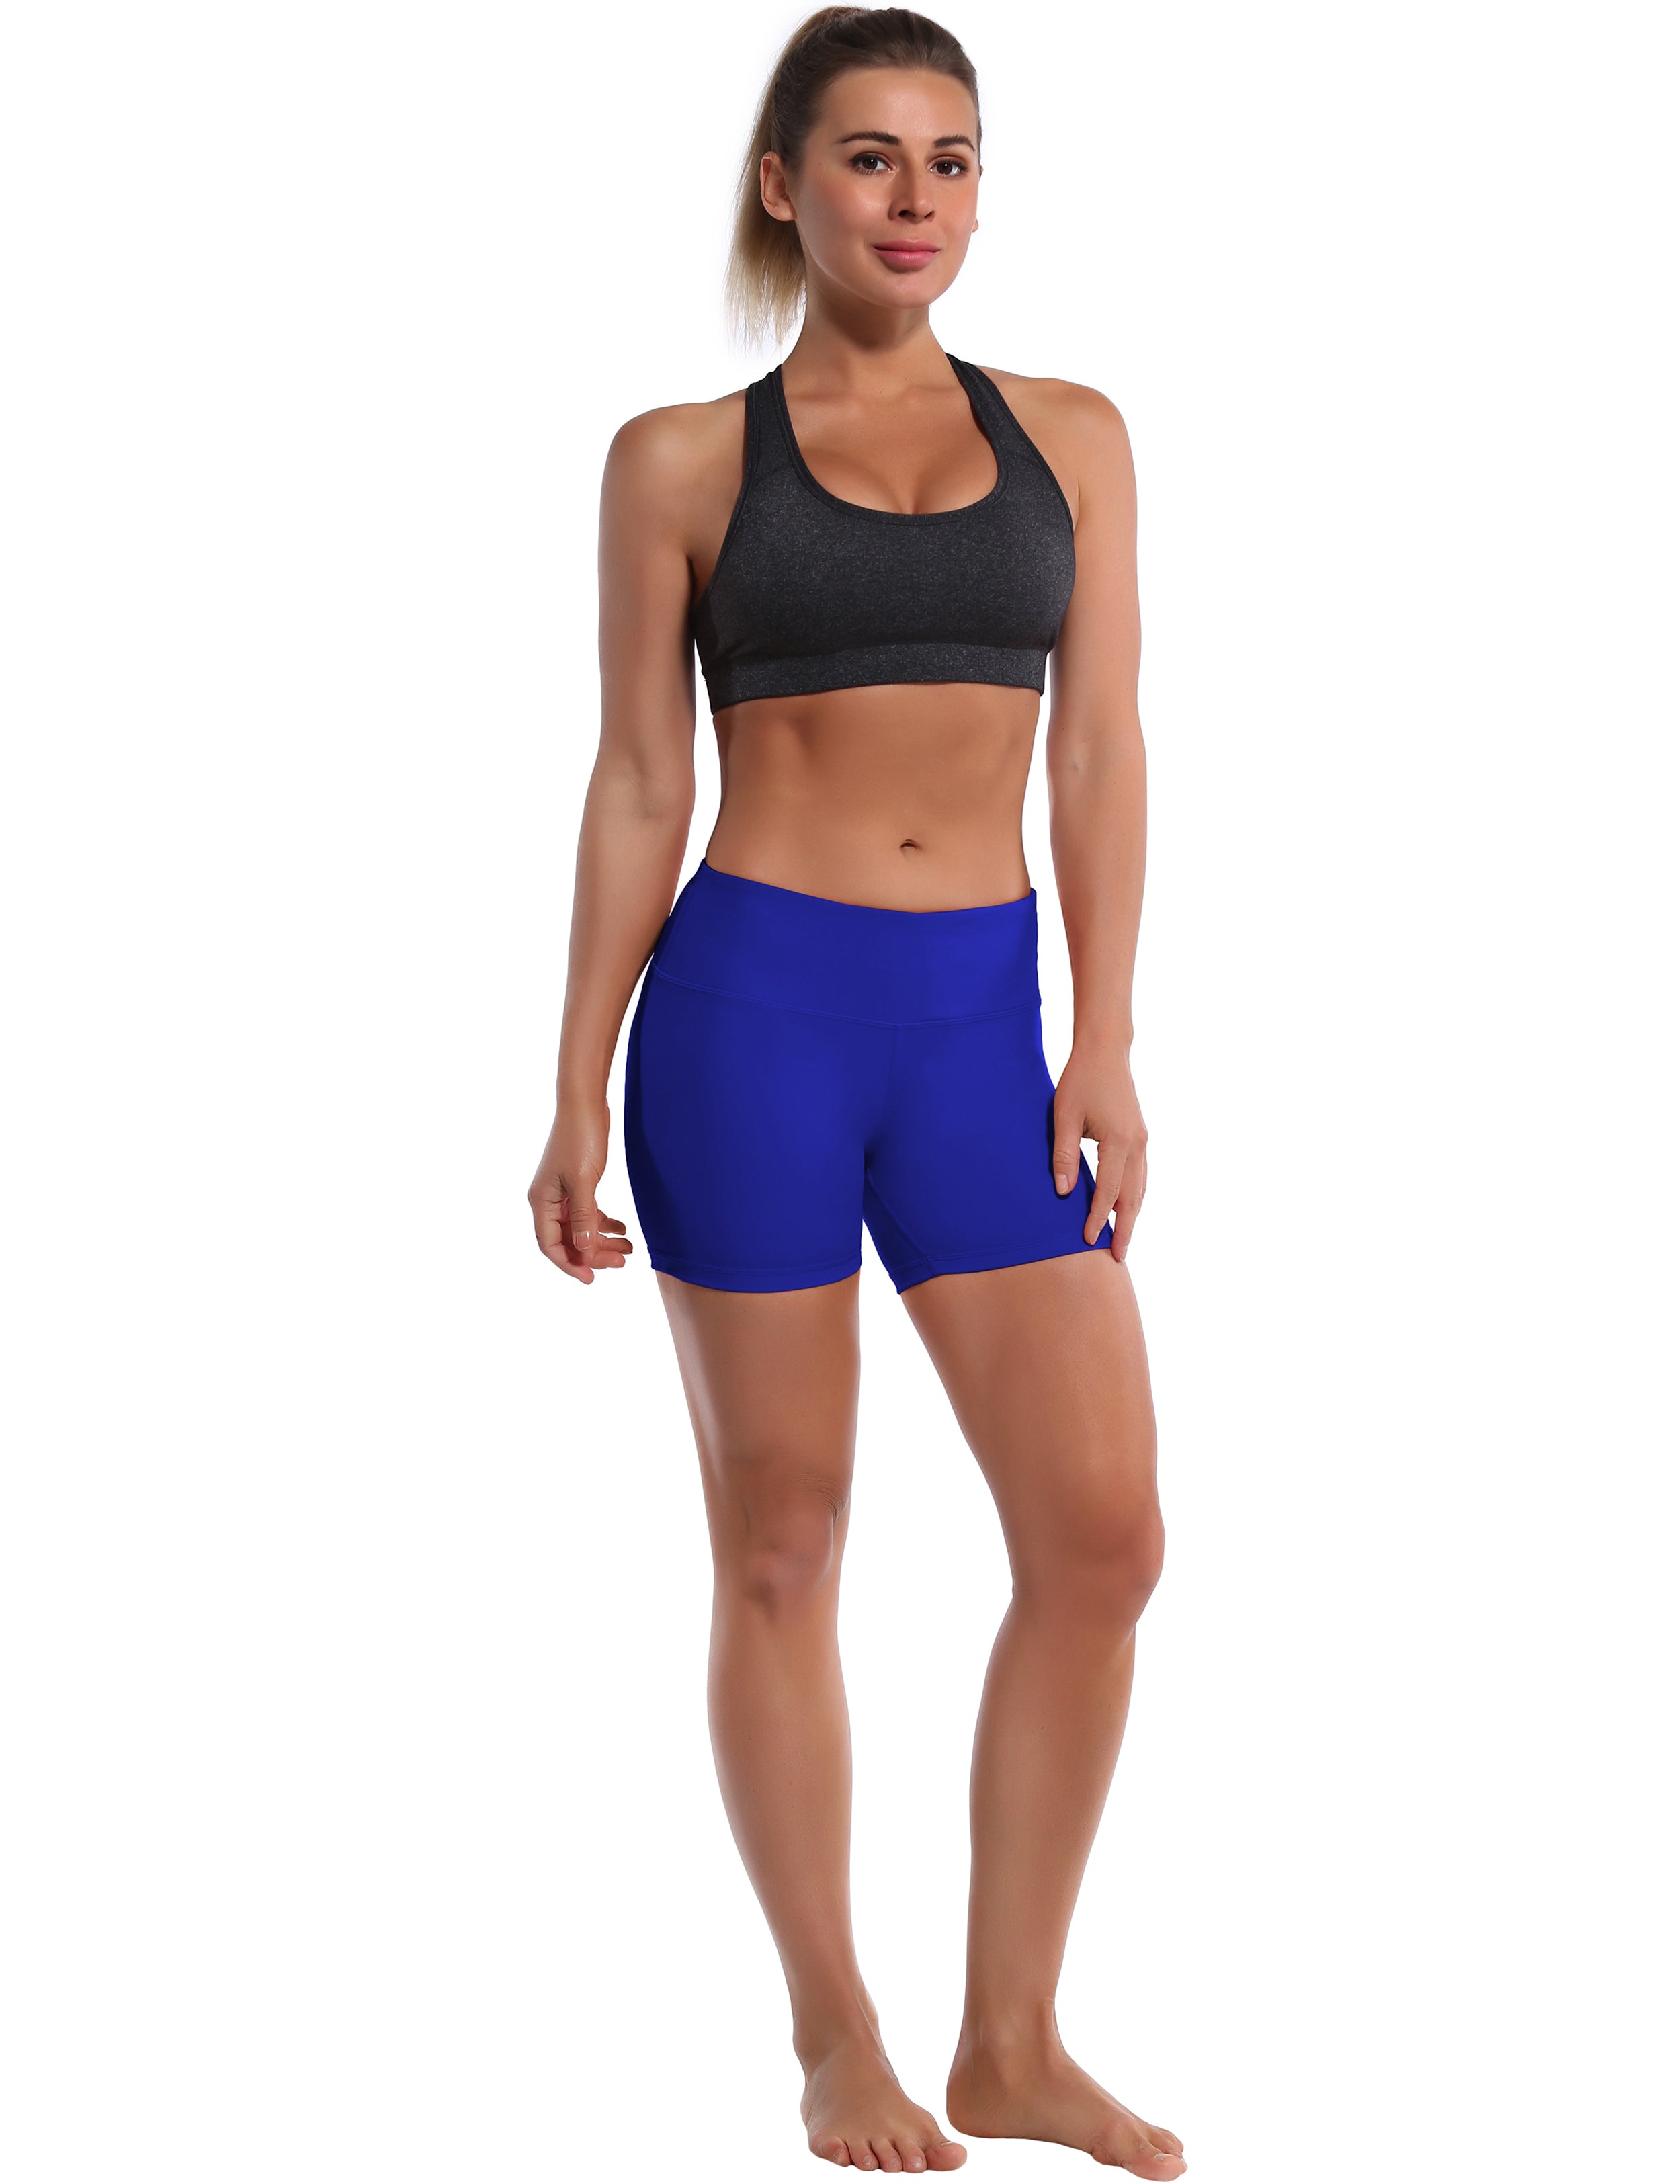 4" Pilates Shorts navy Sleek, soft, smooth and totally comfortable: our newest style is here. Softest-ever fabric High elasticity High density 4-way stretch Fabric doesn't attract lint easily No see-through Moisture-wicking Machine wash 75% Nylon, 25% Spandex